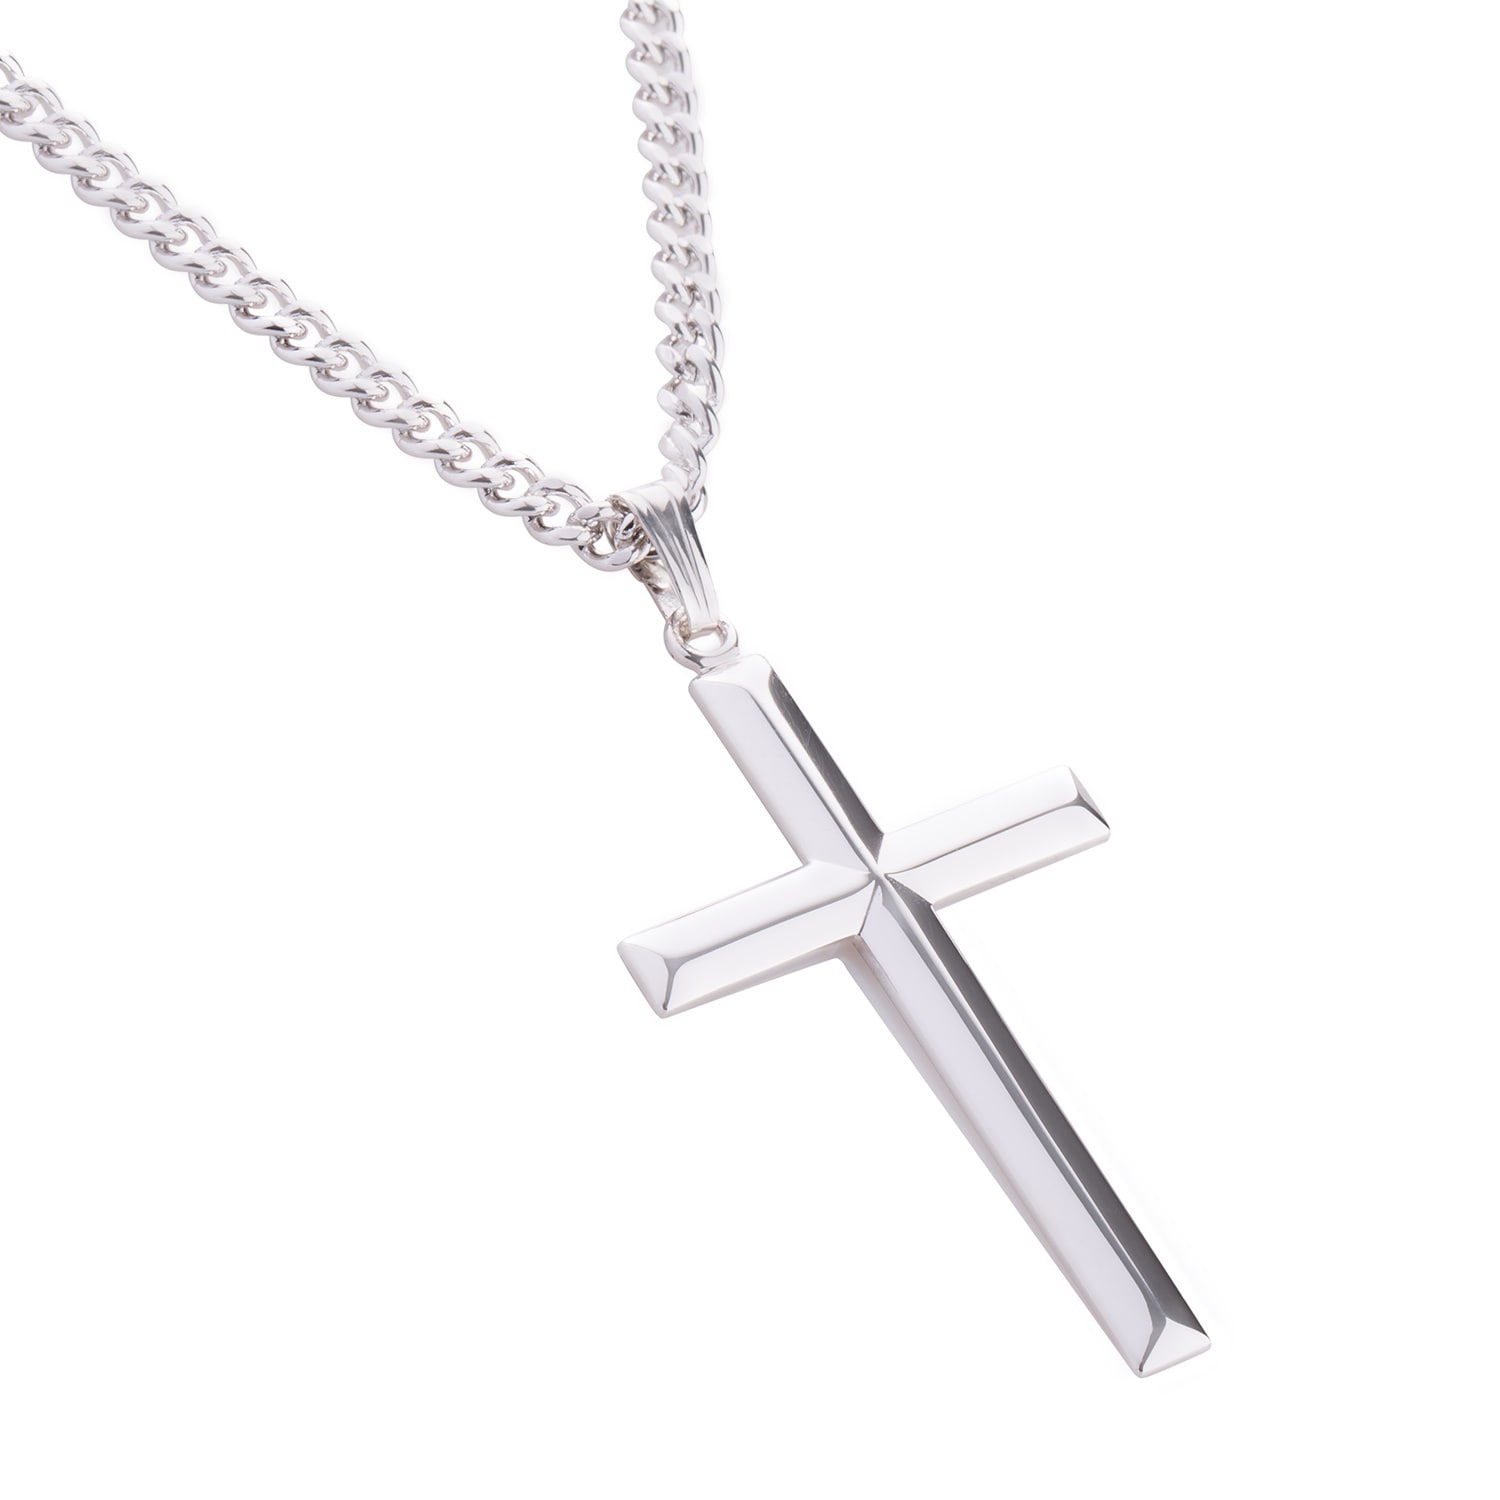 PalmBeach Cross Pendant In Sterling Silver With Stainless Steel Chain 24 Fb4f3ead 9d49 49fa Ba20 Fae382f7776a 